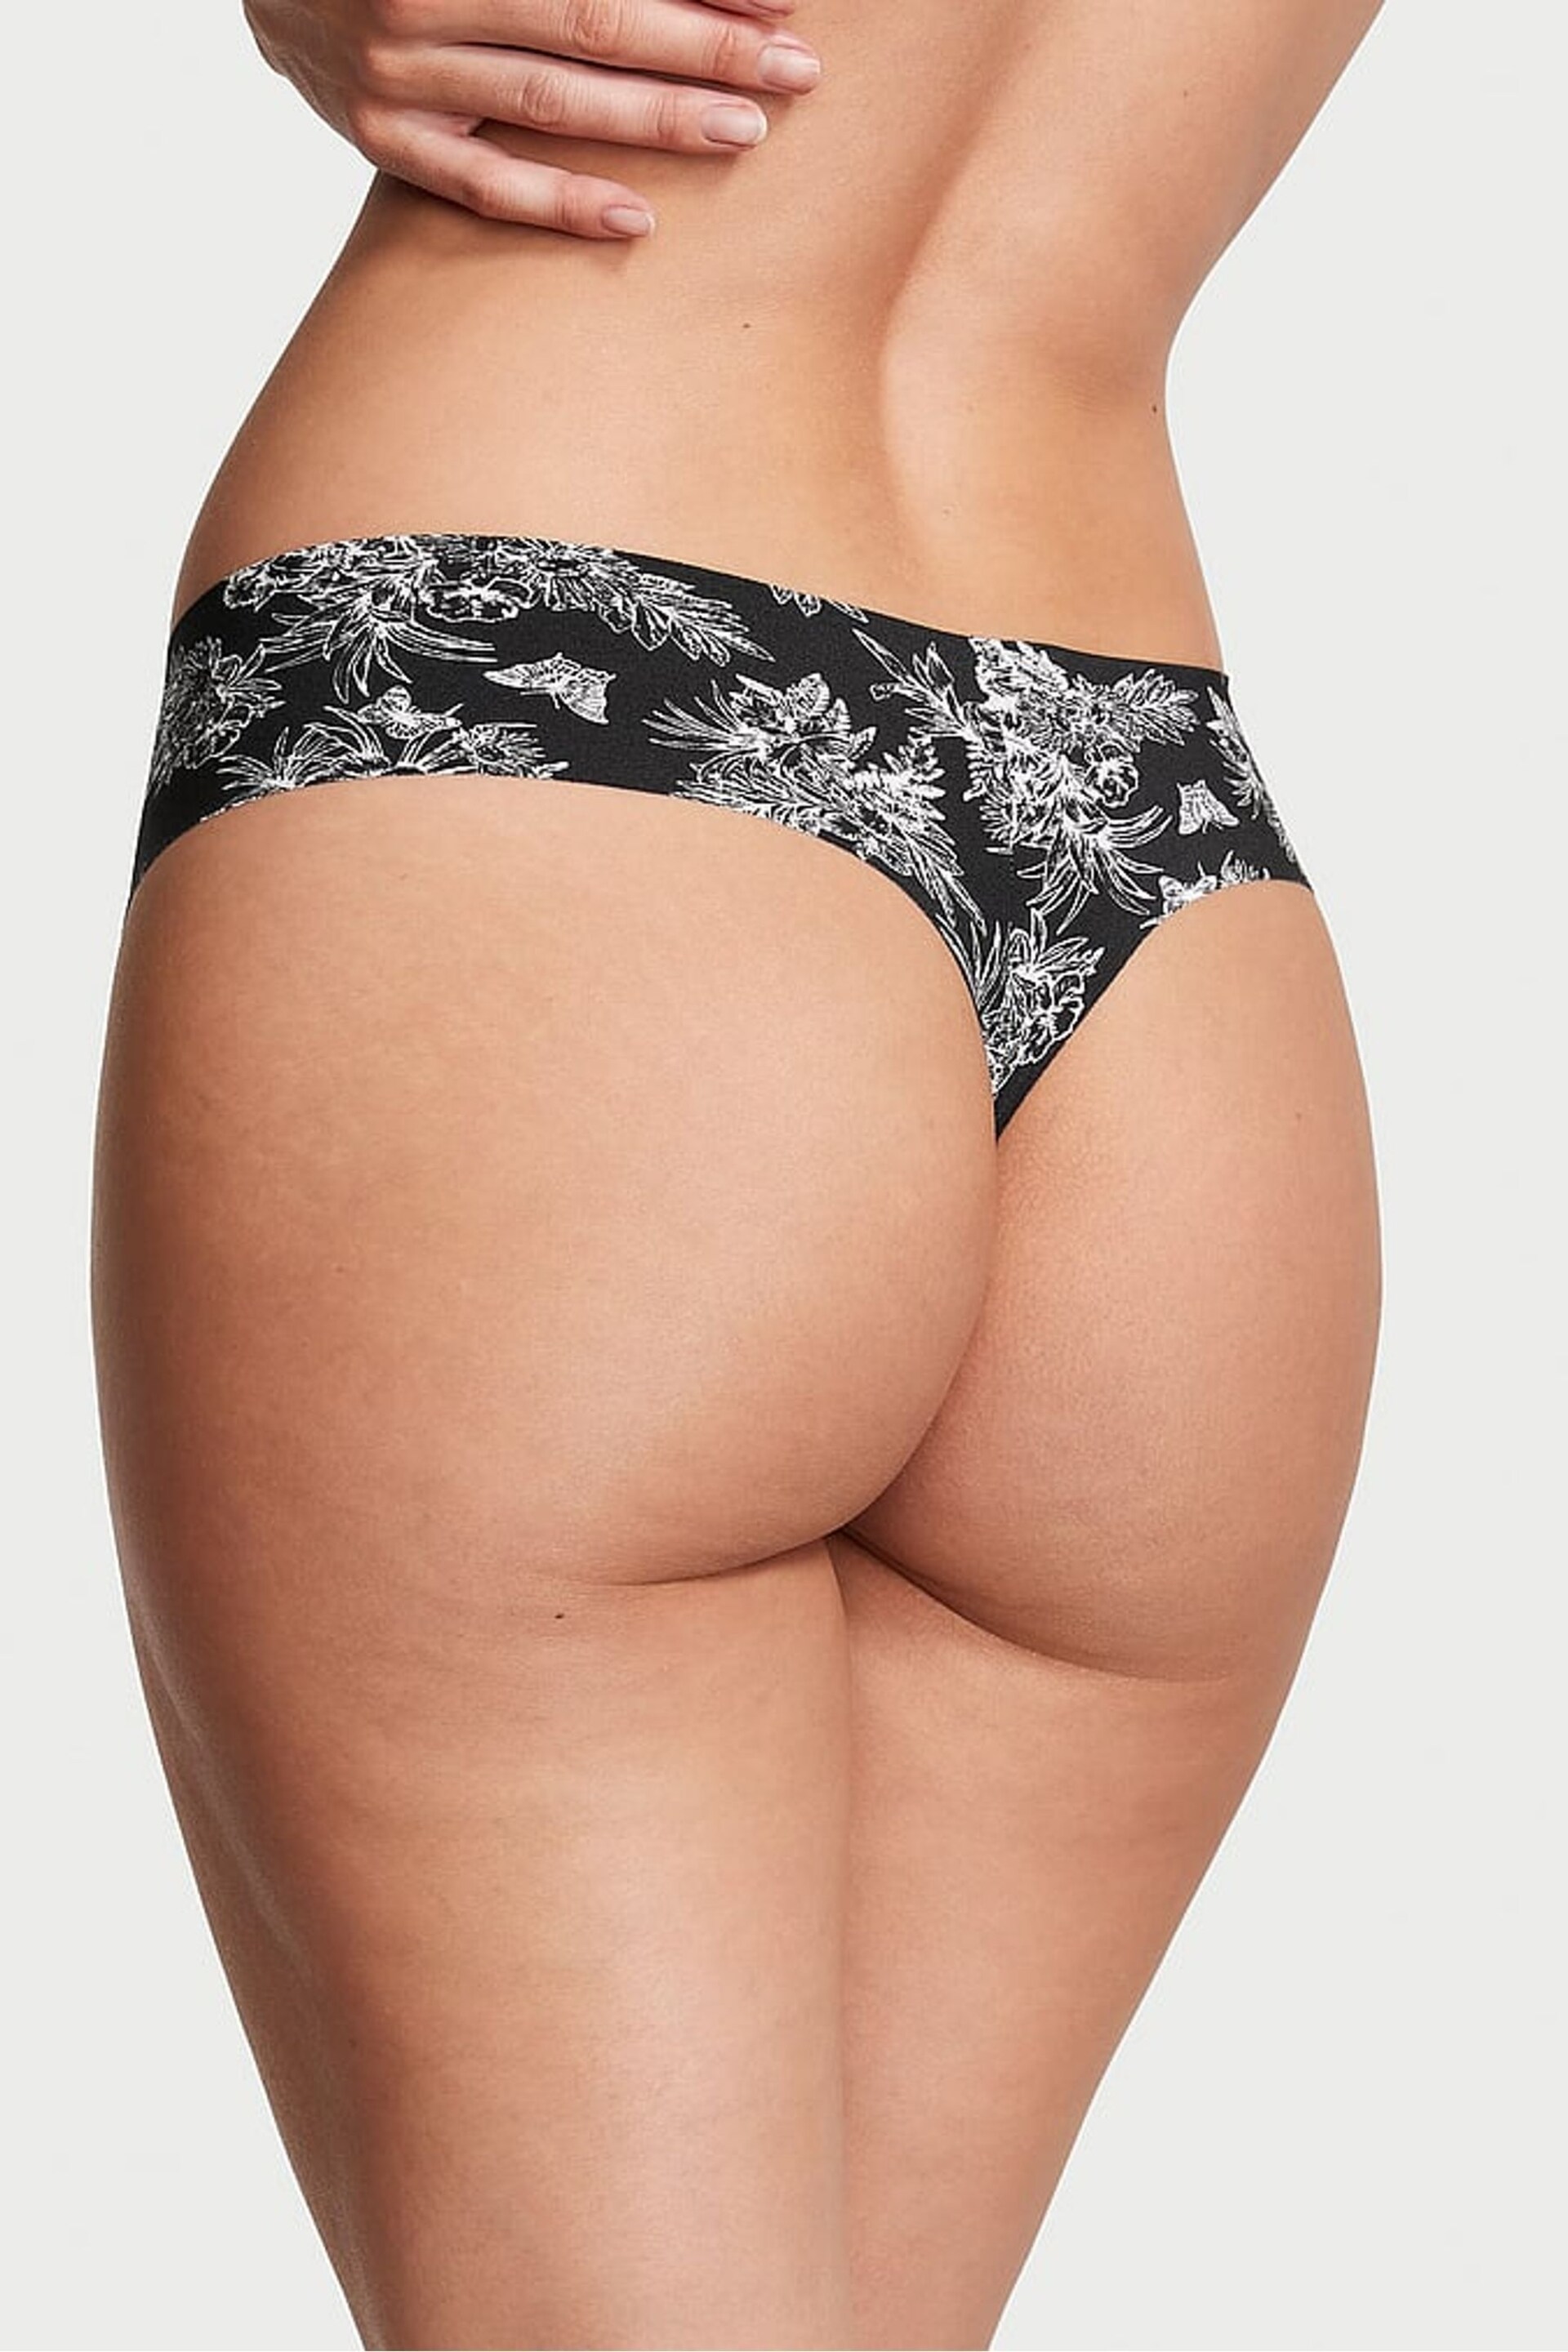 Victoria's Secret Black Tropical Toile Thong Knickers - Image 2 of 3